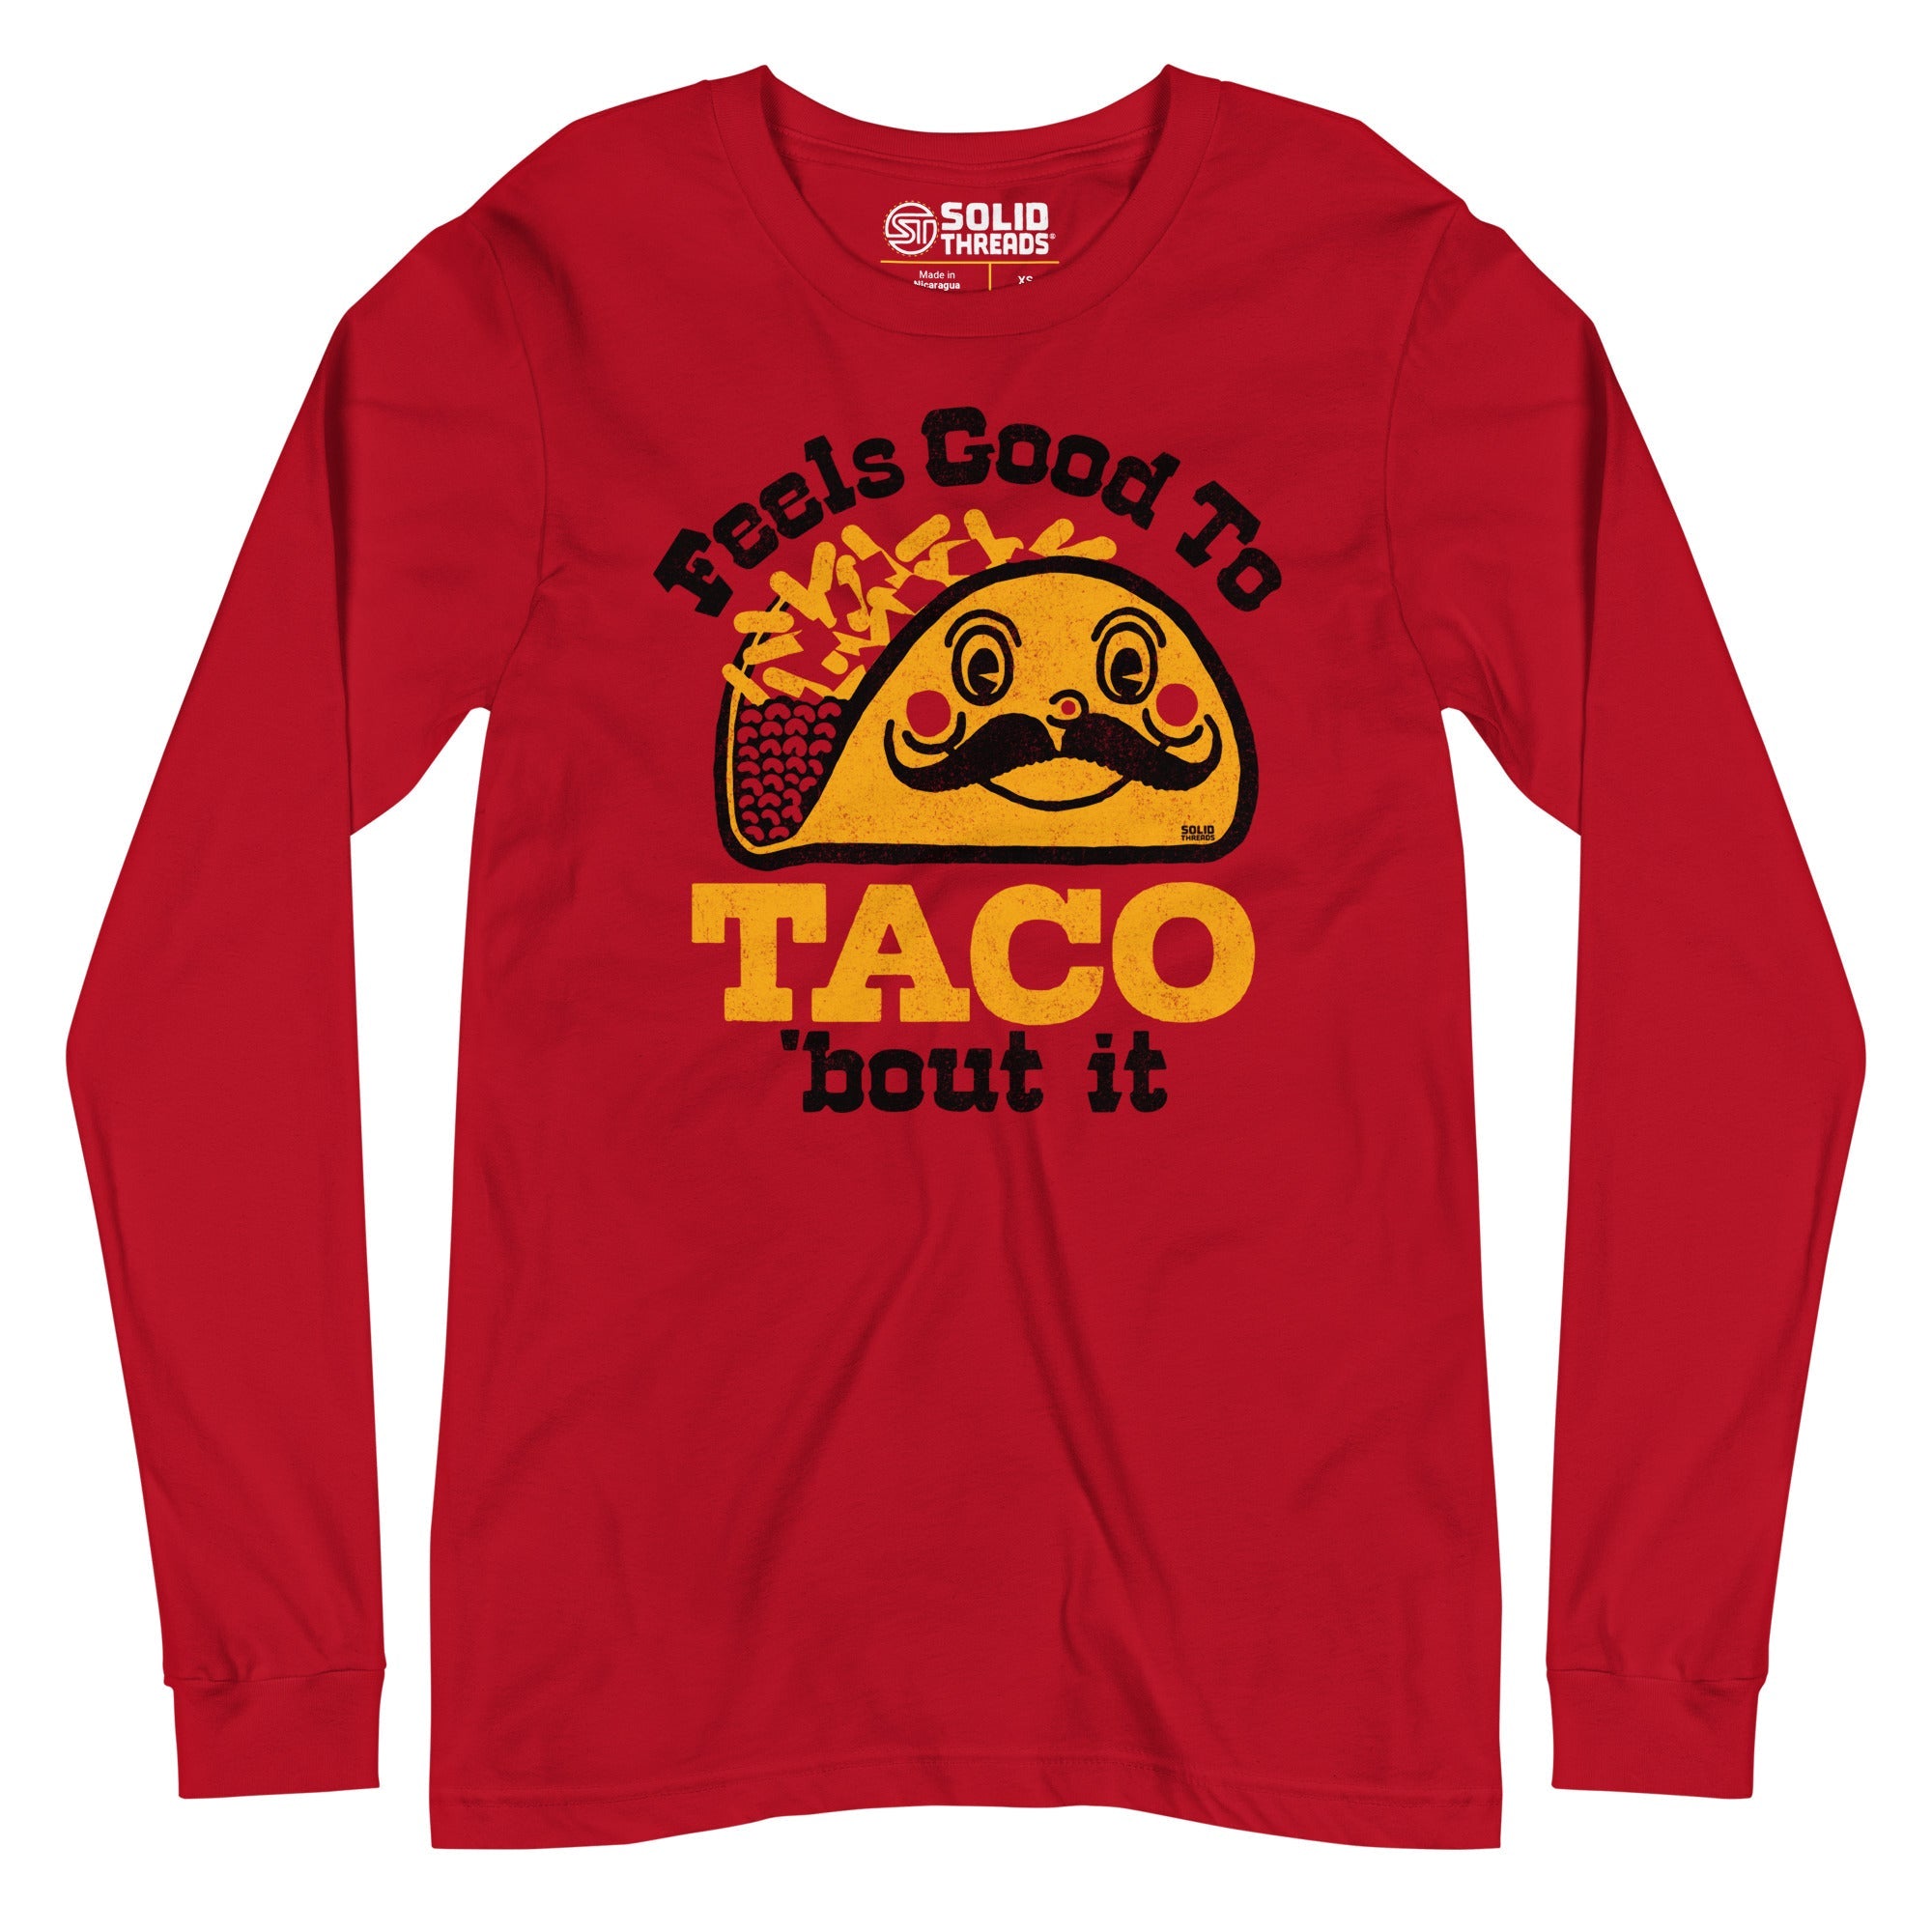 Women's Feels Good To Taco Bout It Vintage Long Sleeve T Shirt | Funny Mexican Food Graphic Tee | Solid Threads